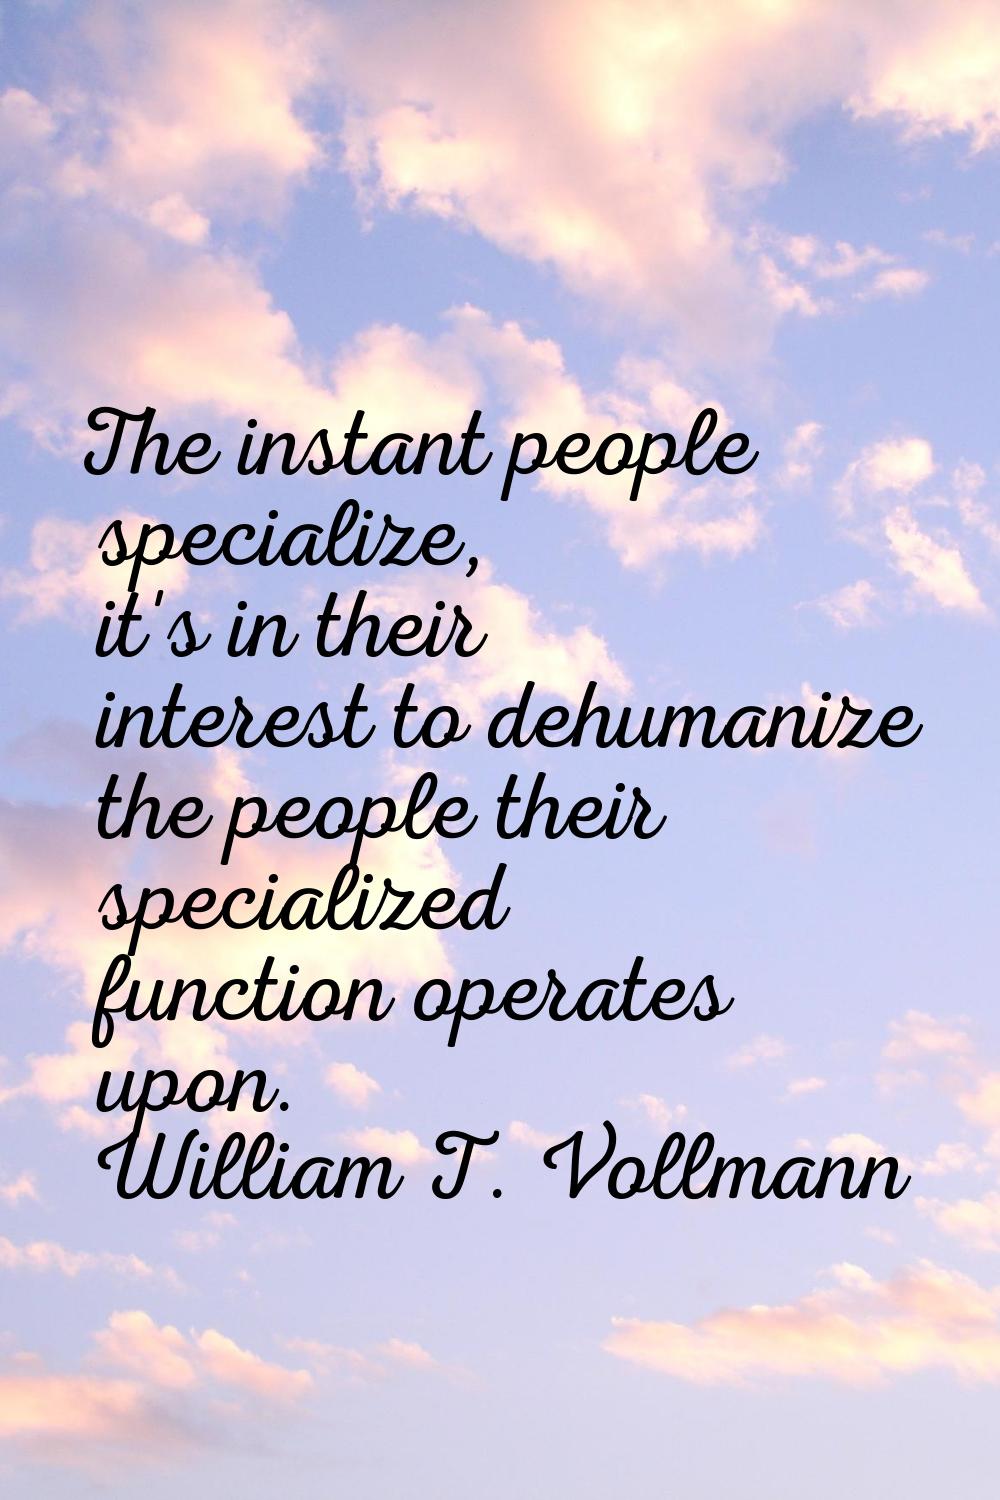 The instant people specialize, it's in their interest to dehumanize the people their specialized fu